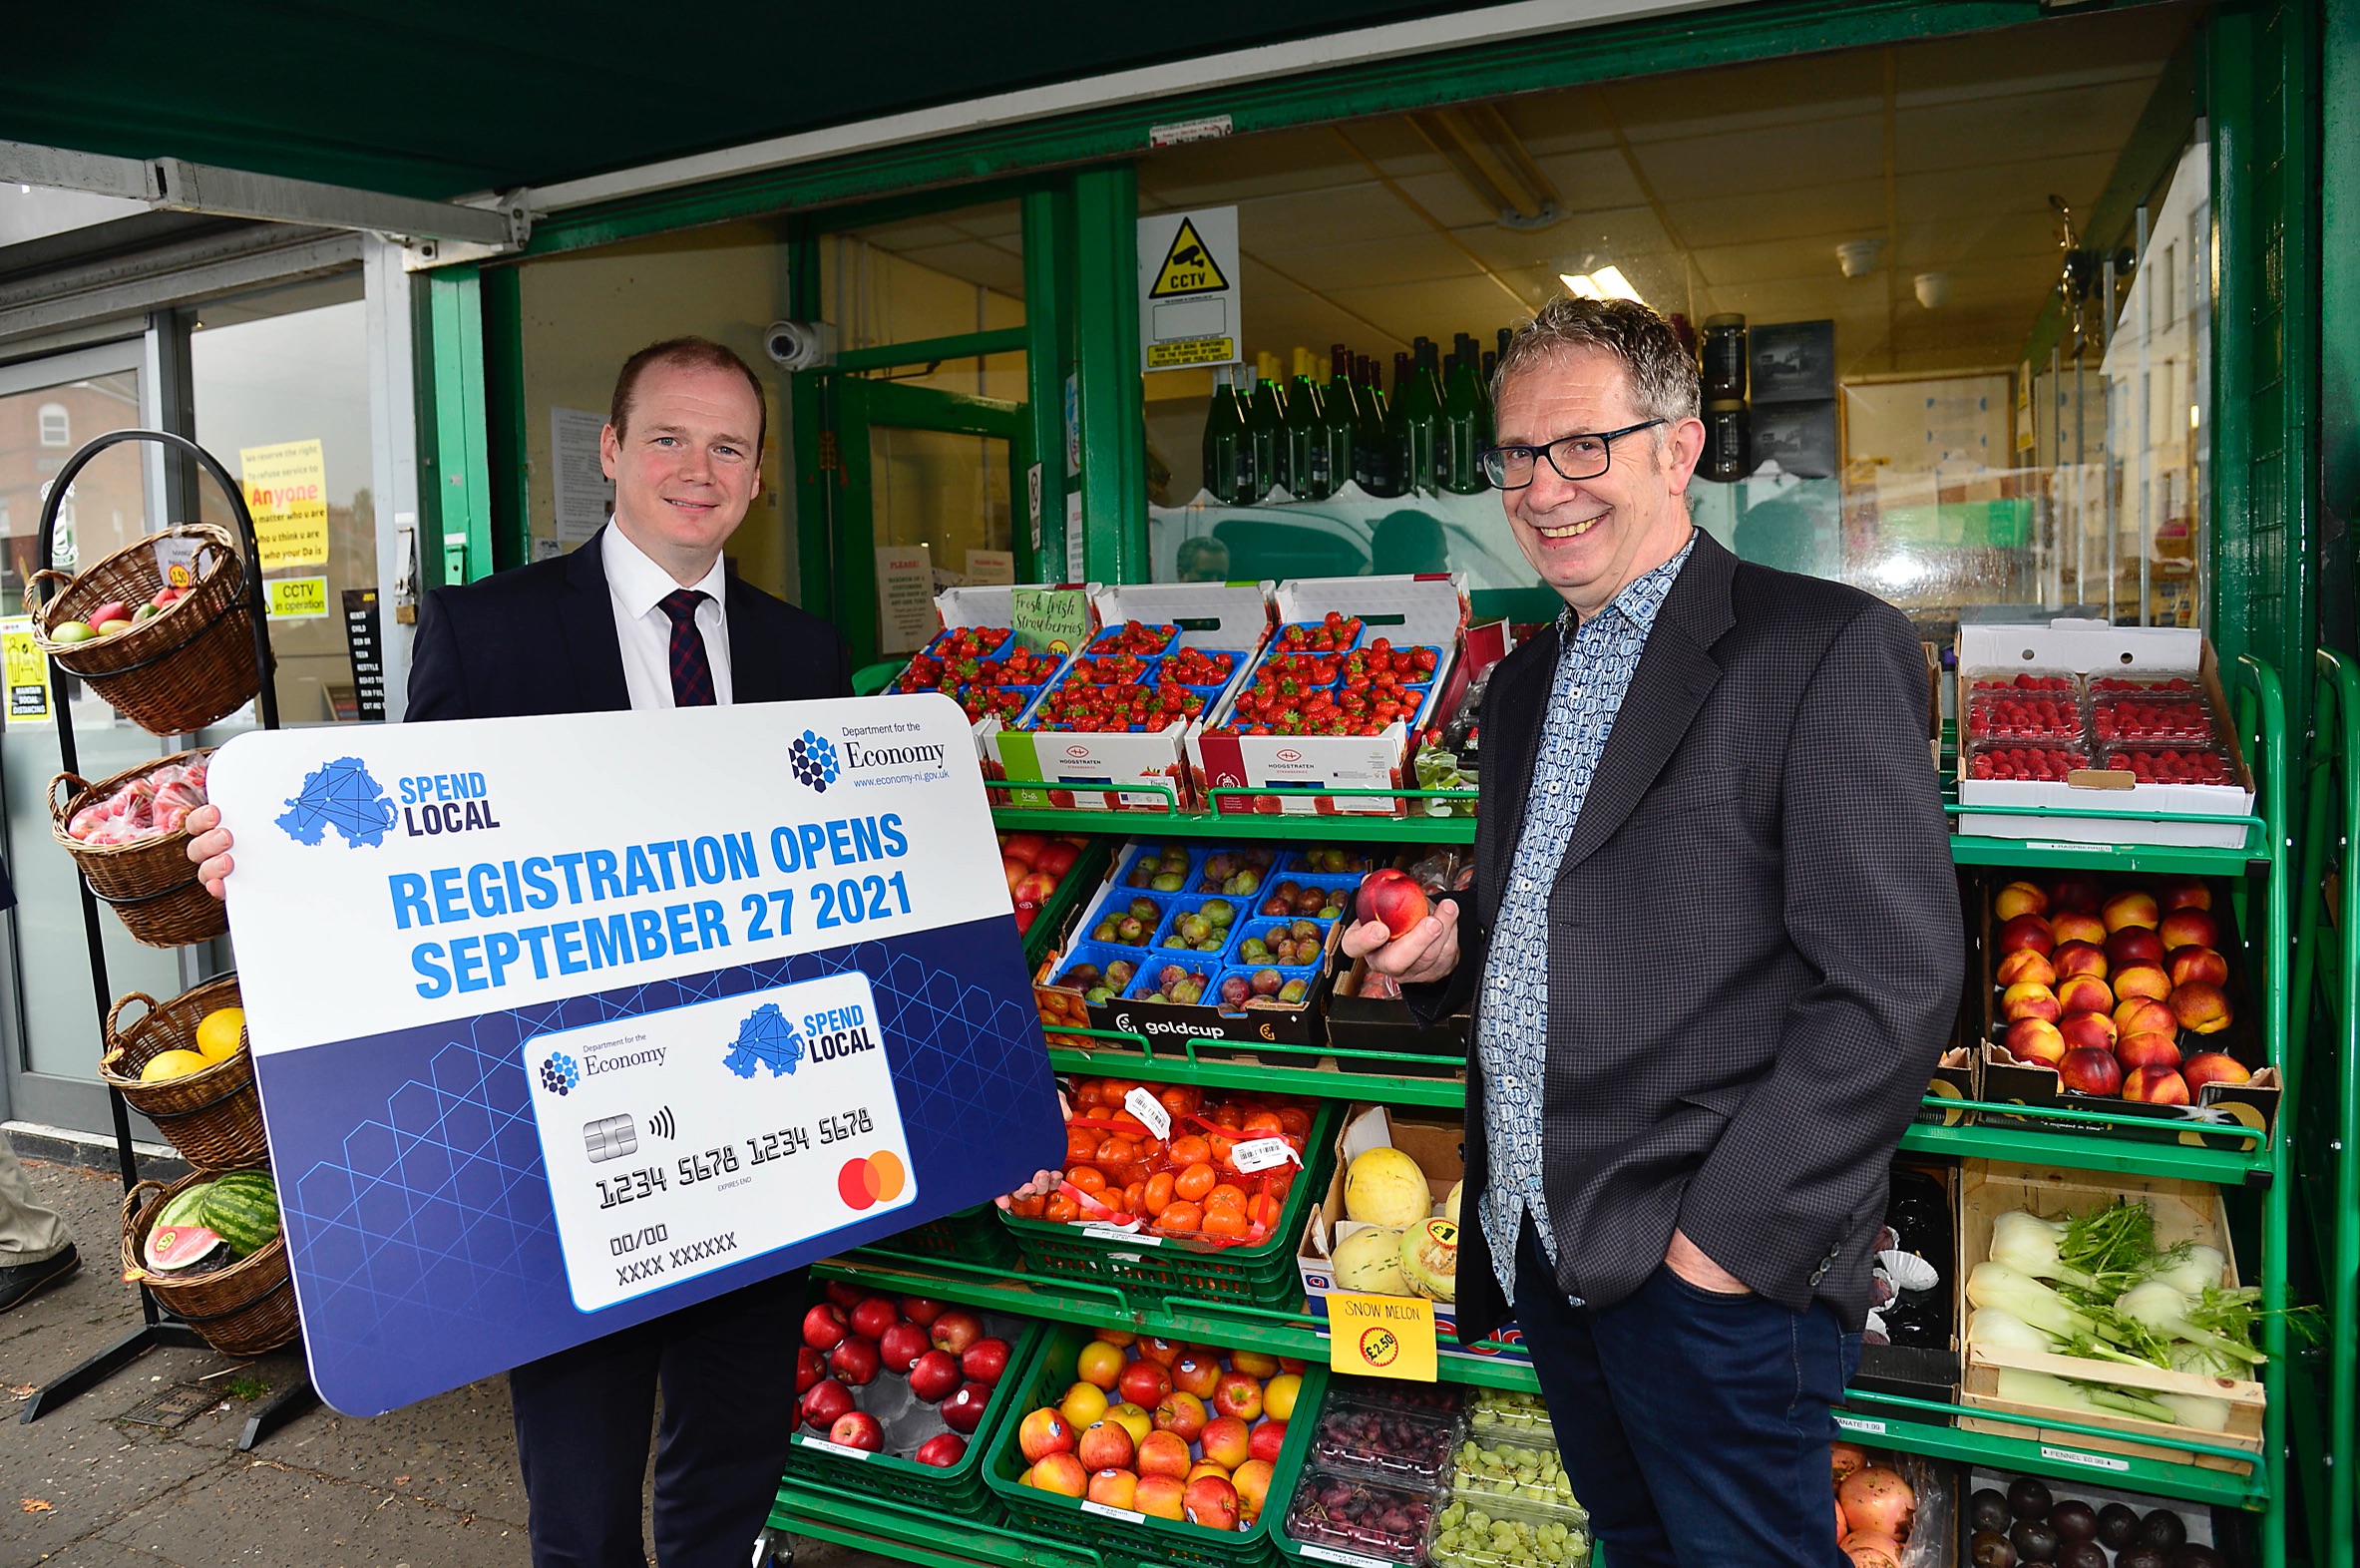 High Street Voucher Scheme opens – Support for local independent retailers